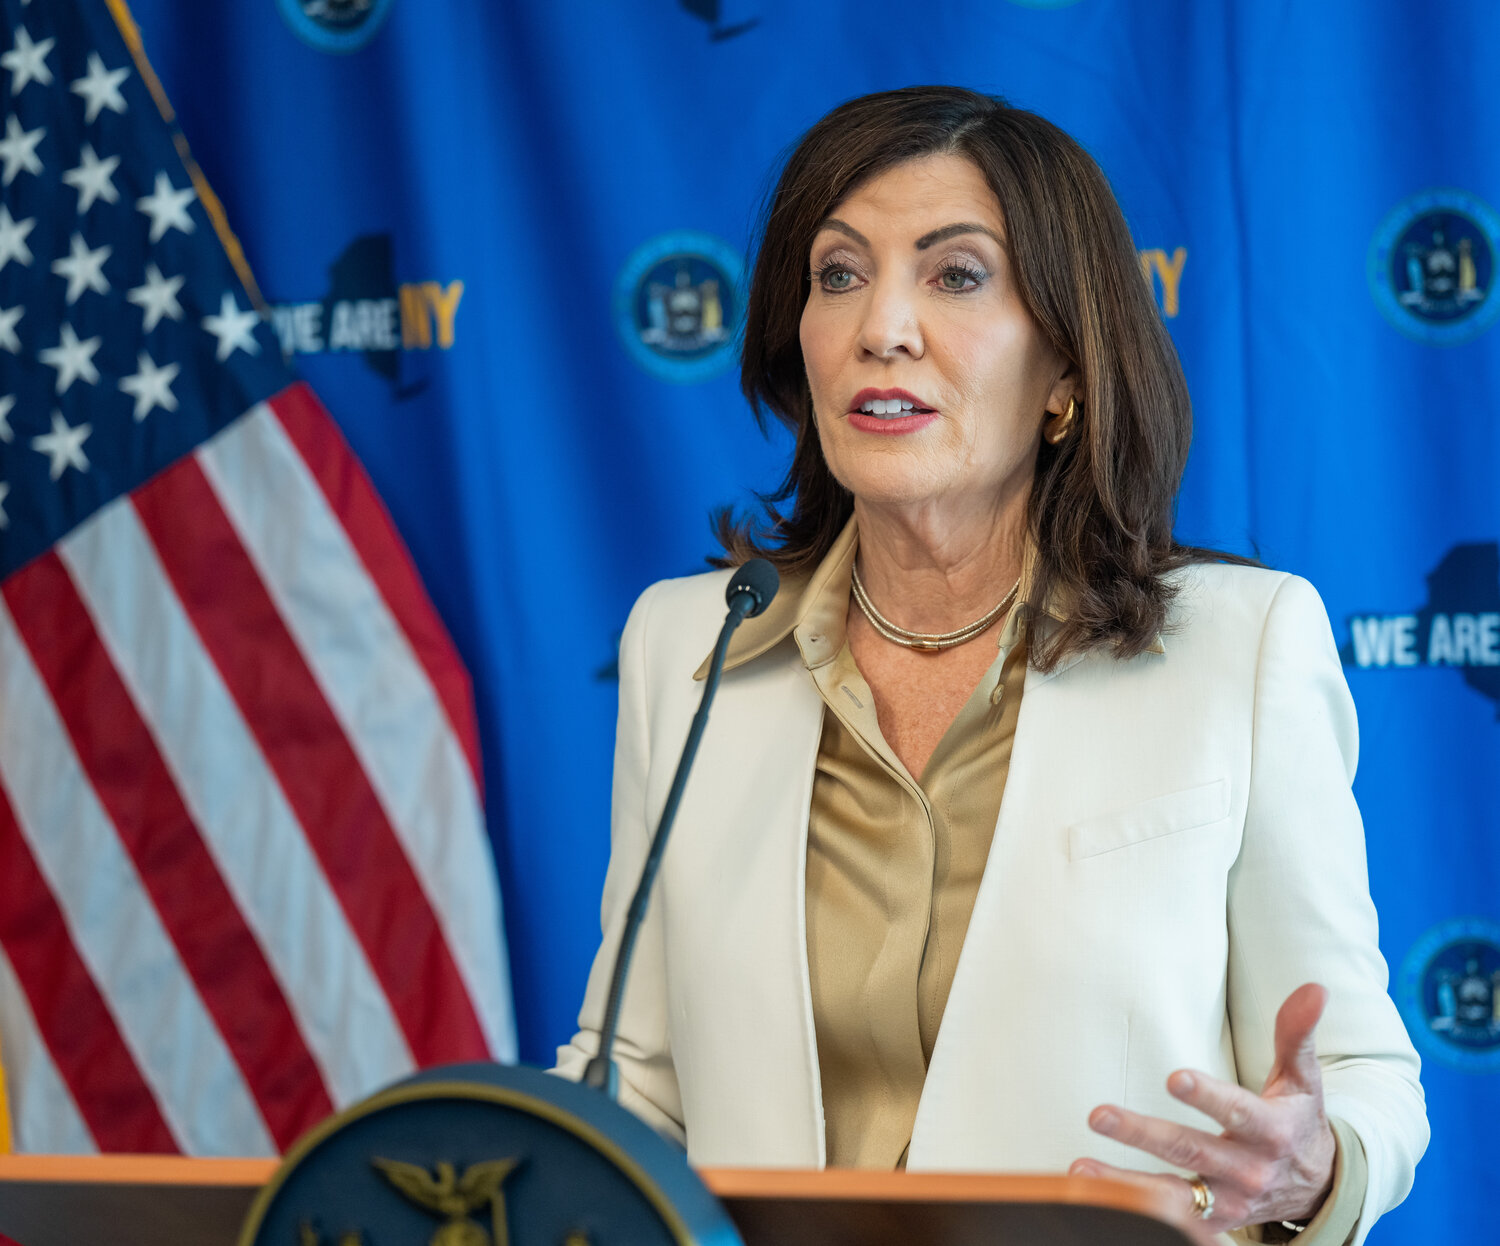 The bill Gov. Kathy Hochul signed will align many local elections, now held in odd-numbered years, with state-wide and federal elections held in even-numbered years.